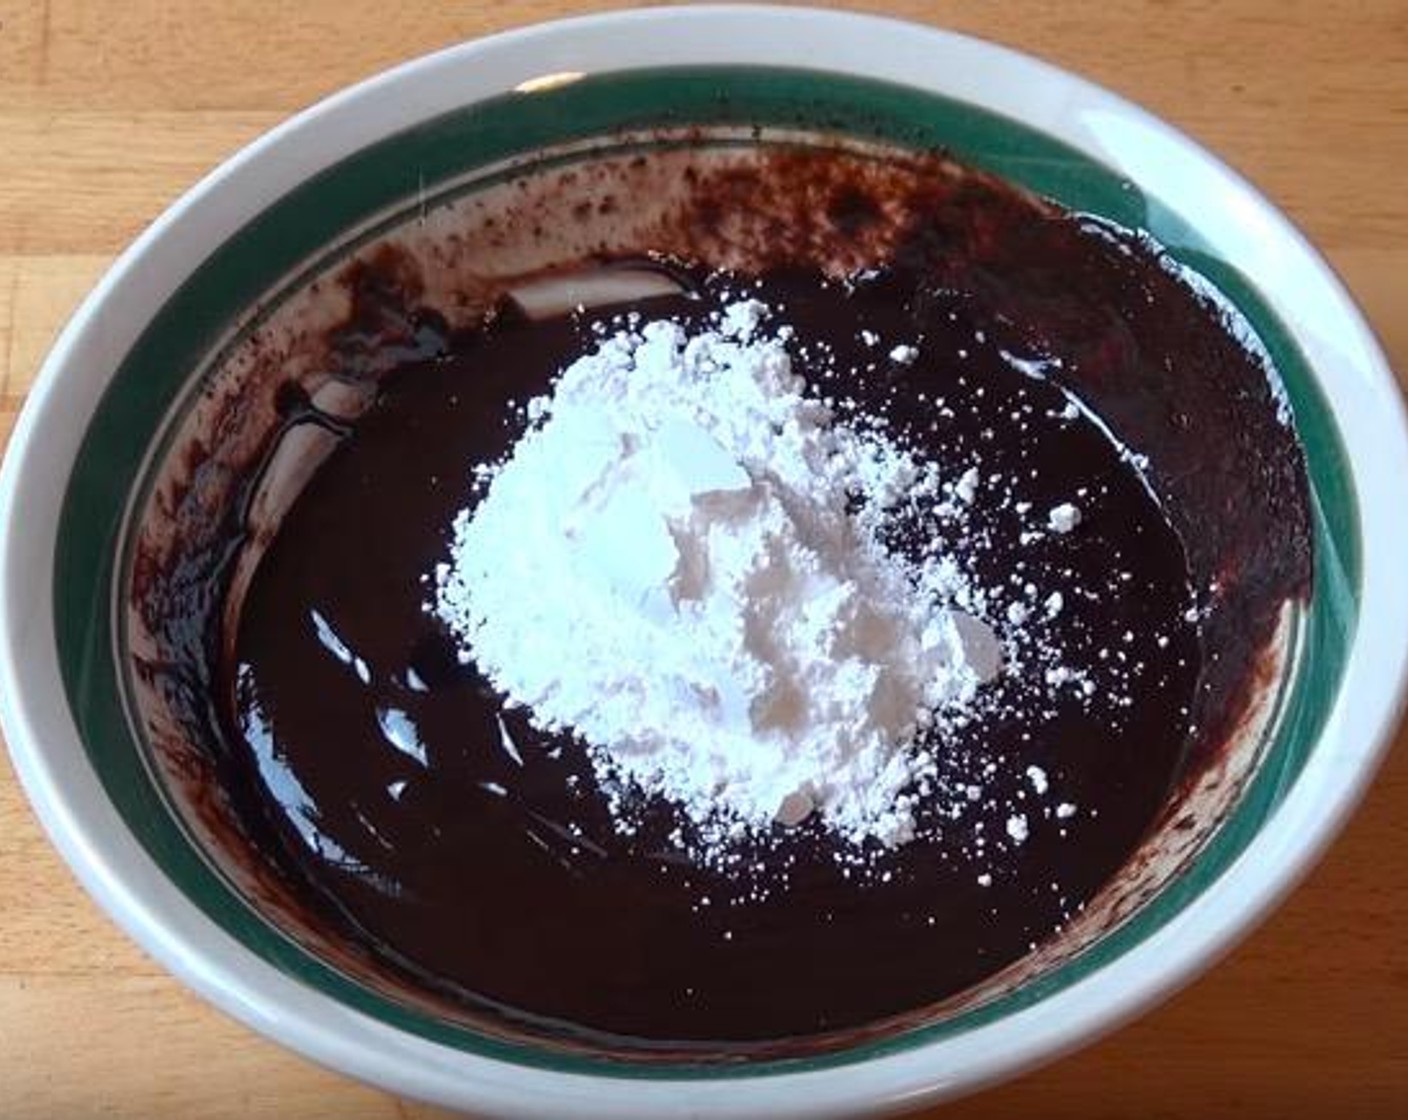 step 4 Into the chocolate and cream mixture, add Vanilla Extract (1 tsp) and Powdered Confectioners Sugar (1/4 cup). Stir until combined.